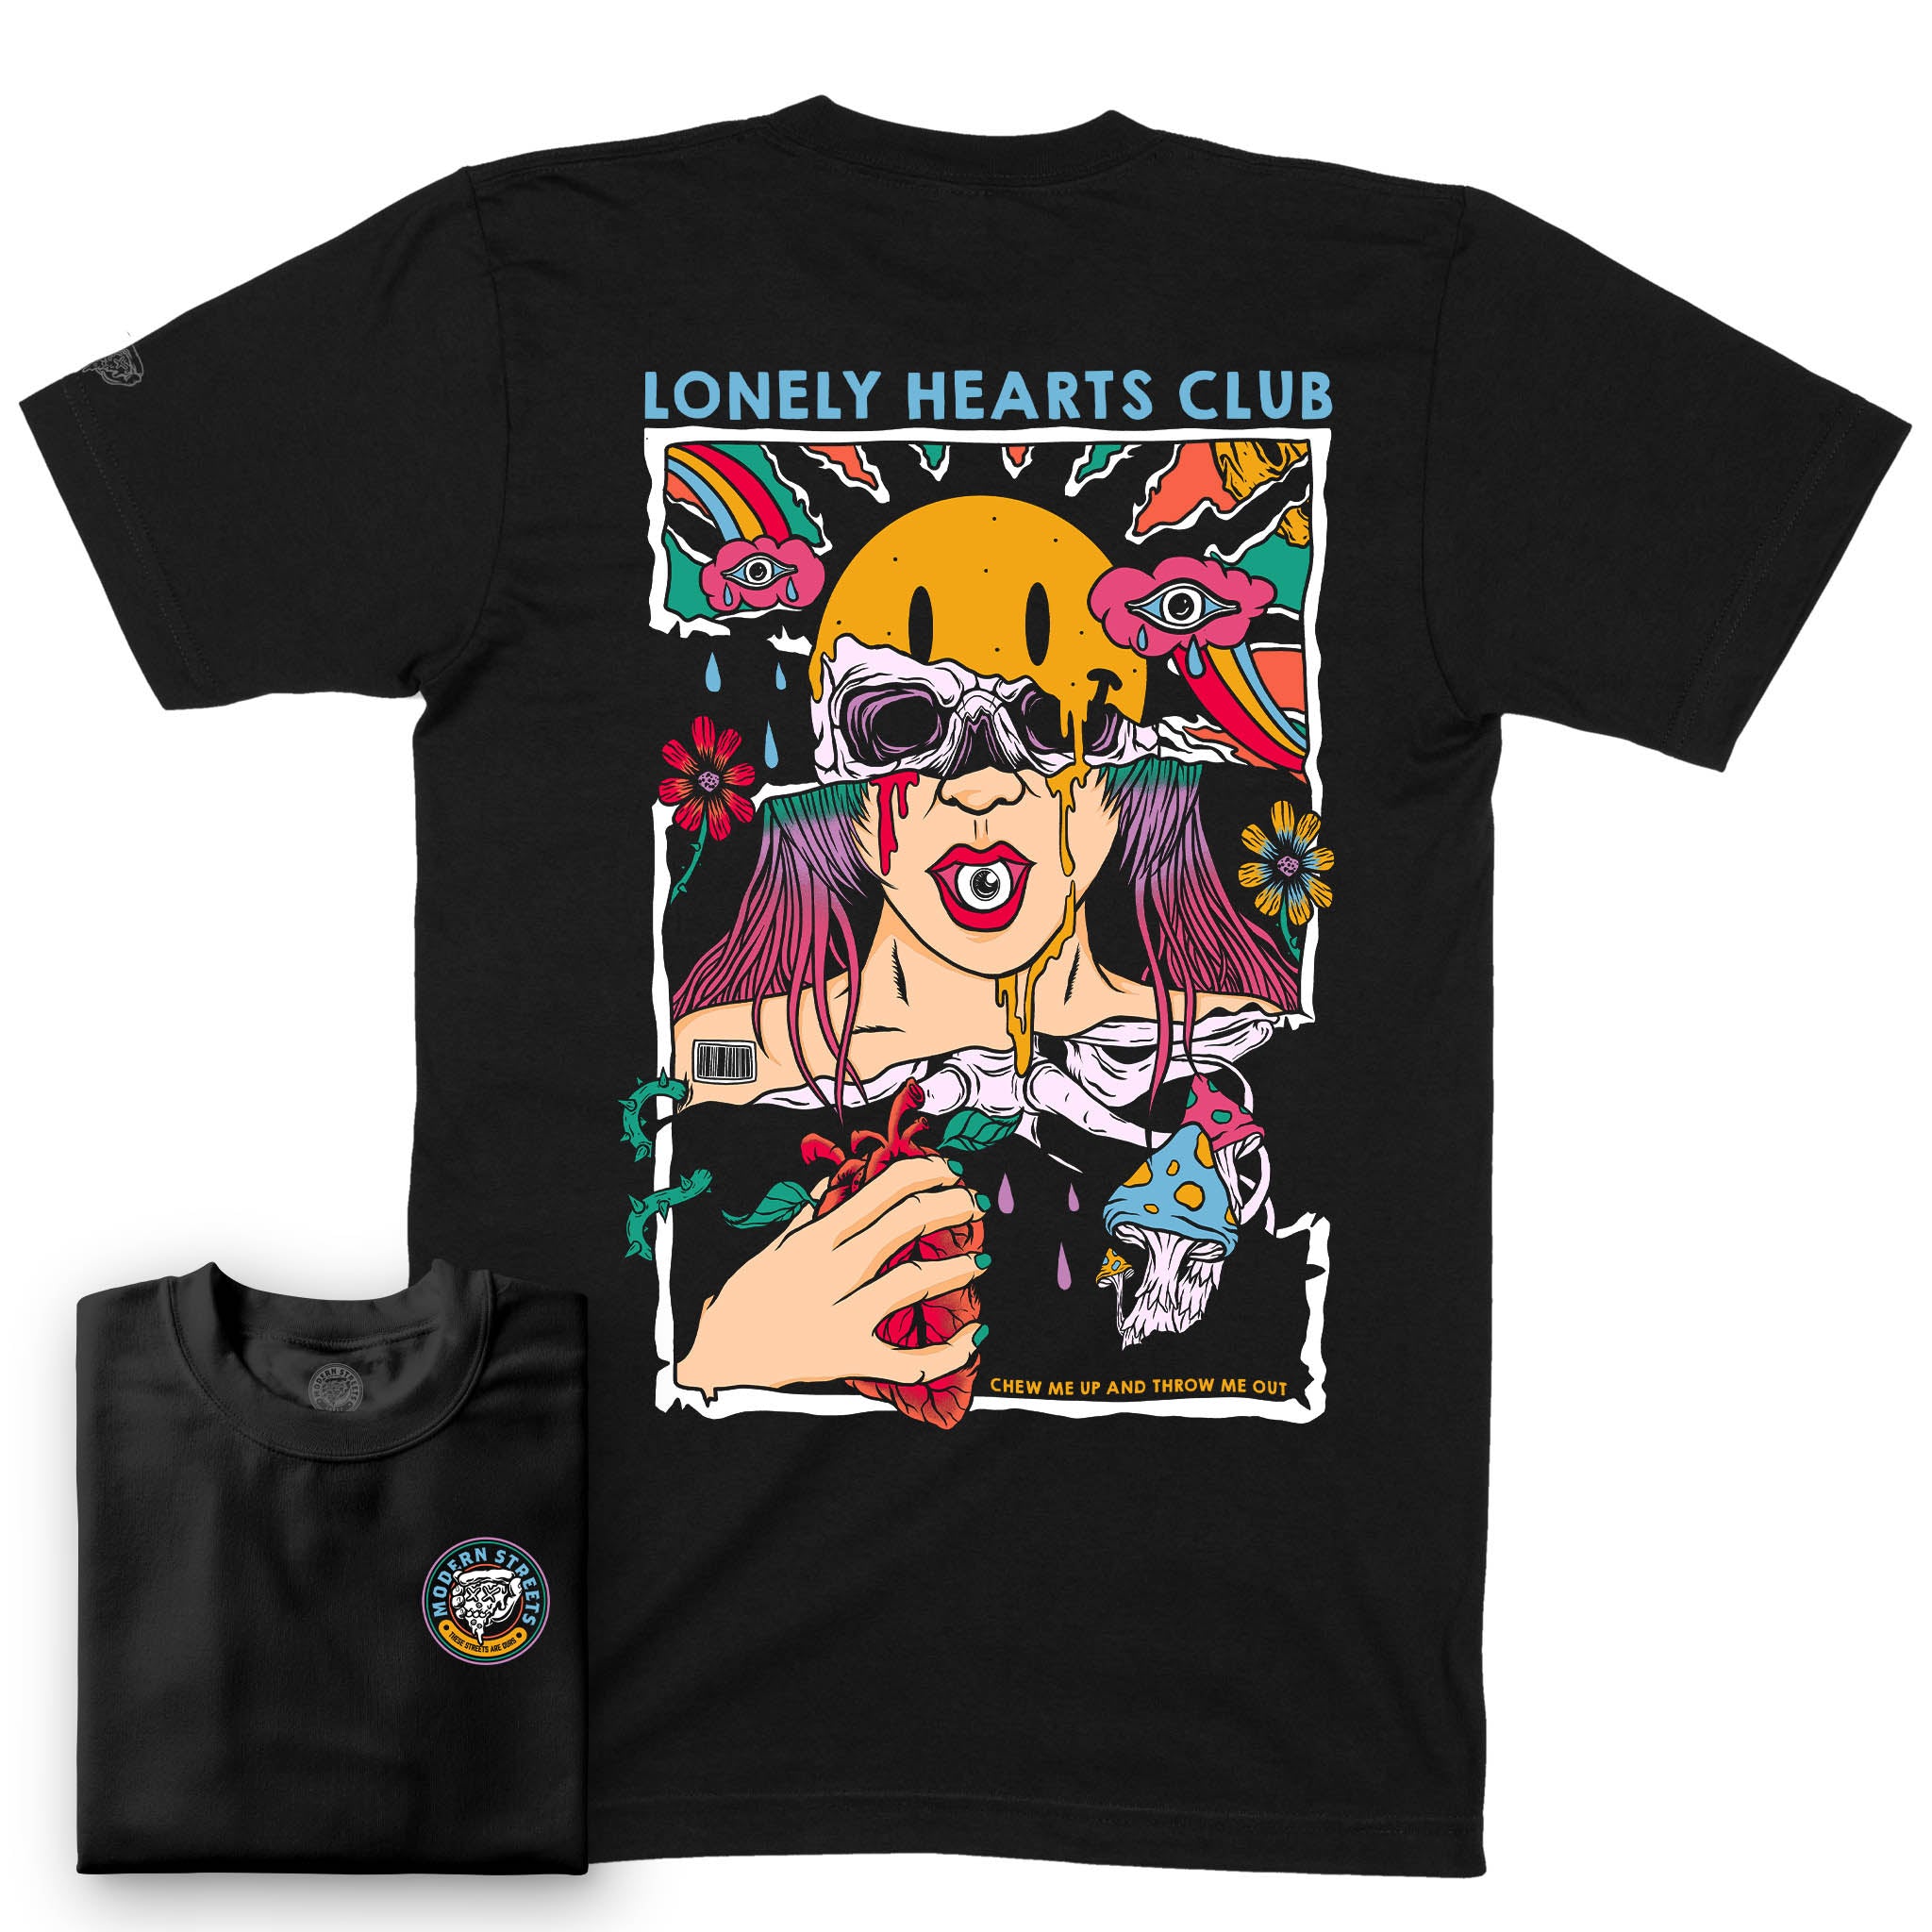 Lonely Hearts Club T-Shirt*